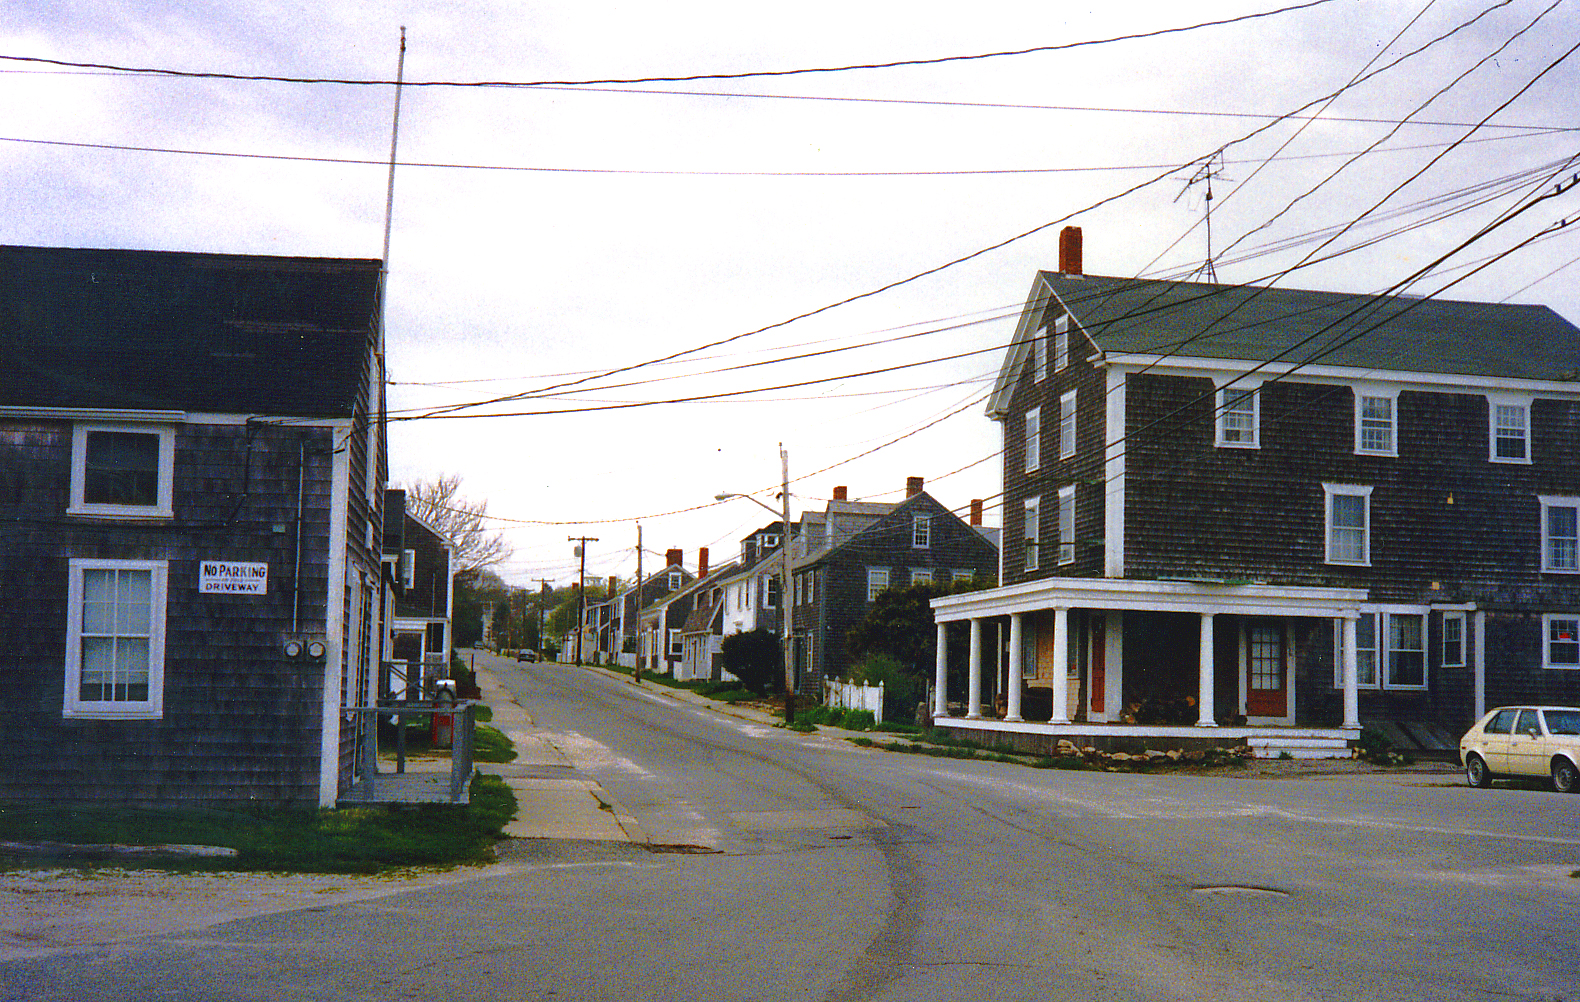 houses and an old car line the street